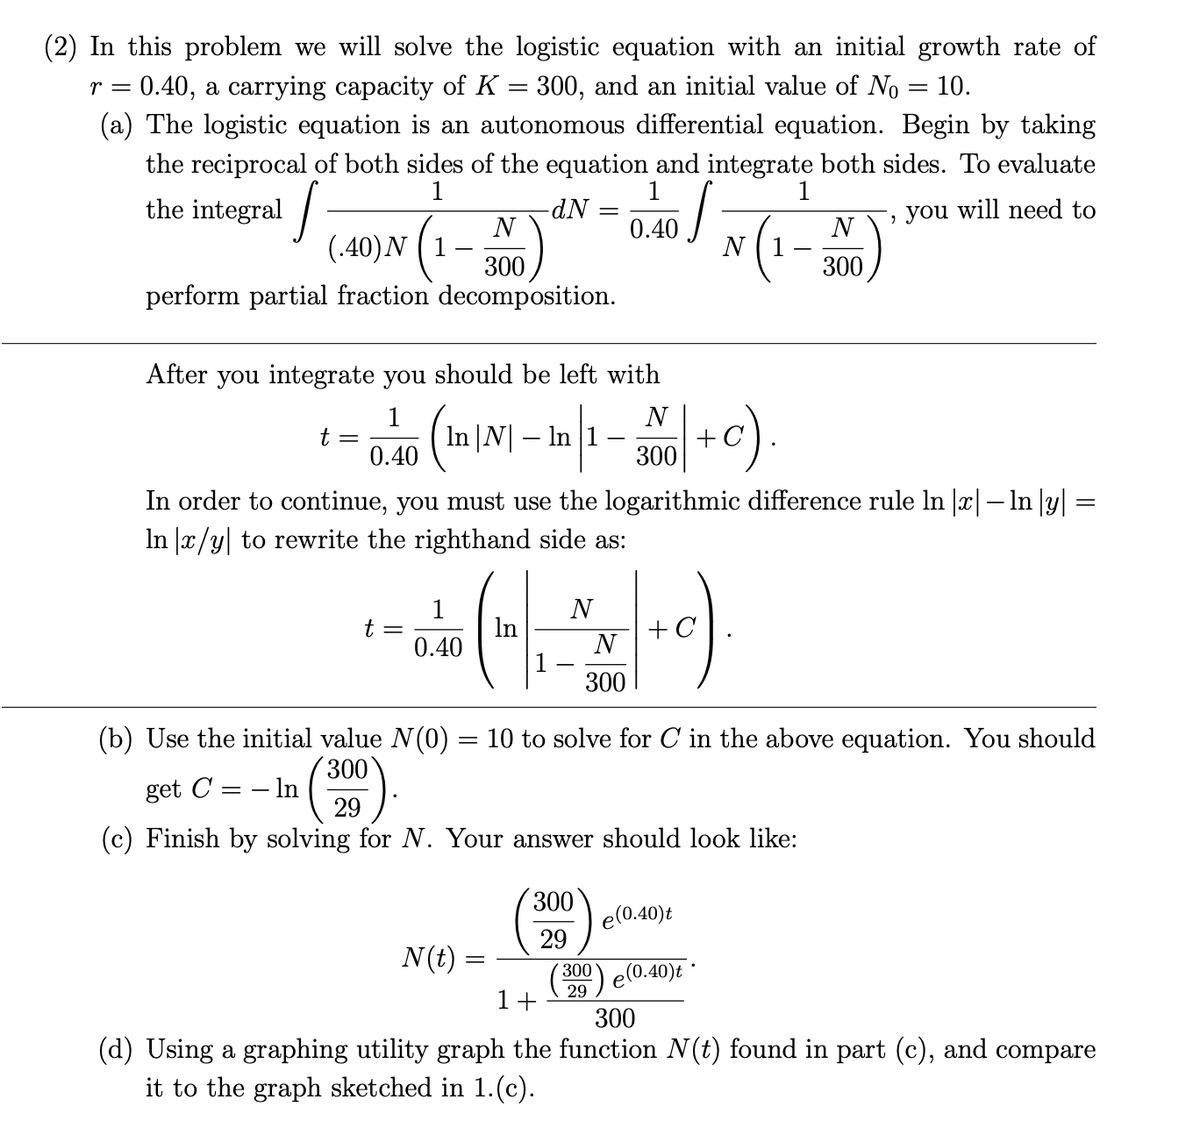 (2) In this problem we will solve the logistic equation with an initial growth rate of
r = 0.40, a carrying capacity of K = 300, and an initial value of No
(a) The logistic equation is an autonomous differential equation. Begin by taking
the reciprocal of both sides of the equation and integrate both sides. To evaluate
10.
1
1
1
the integral /
you will need to
N
0.40
N
(.40)N (1
300
N ( 1
300
perform partial fraction decomposition.
After you integrate you should be left with
1
N
In |N| – In |1
t =
0.40
300
In order to continue, you must use the logarithmic difference rule In |x|– In |y| =
In |x/y| to rewrite the righthand side as:
1
t =
In
0.40
N
+ C
N
300
(b) Use the initial value N(0) = 10 to solve for C in the above equation. You should
300
get C = – In
29
(c) Finish by solving for N. Your answer should look like:
300
e(0.40)t
29
N(t) =
300
e(0.40)t
29
1+
300
(d) Using a graphing utility graph the function N(t) found in part (c), and compare
it to the graph sketched in 1.(c).
